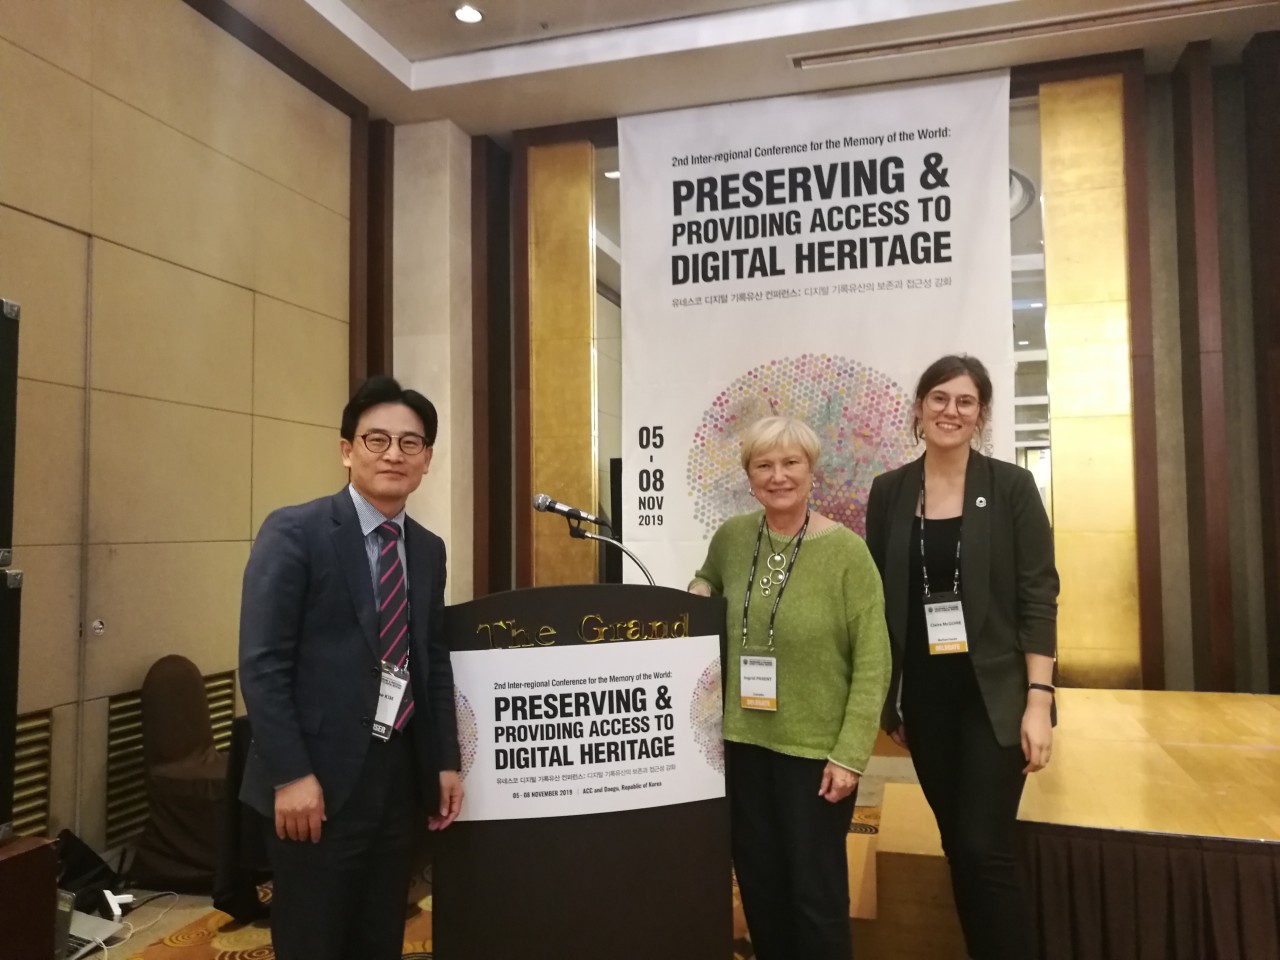 (L to R) Kwibae Kim, chair of Memory of the World Committee for the Asia-Pacific, Ingrid Parent, past IFLA president and UNESCO-PERSIST chair, Claire McGuire, IFLA Policy and Research Officer